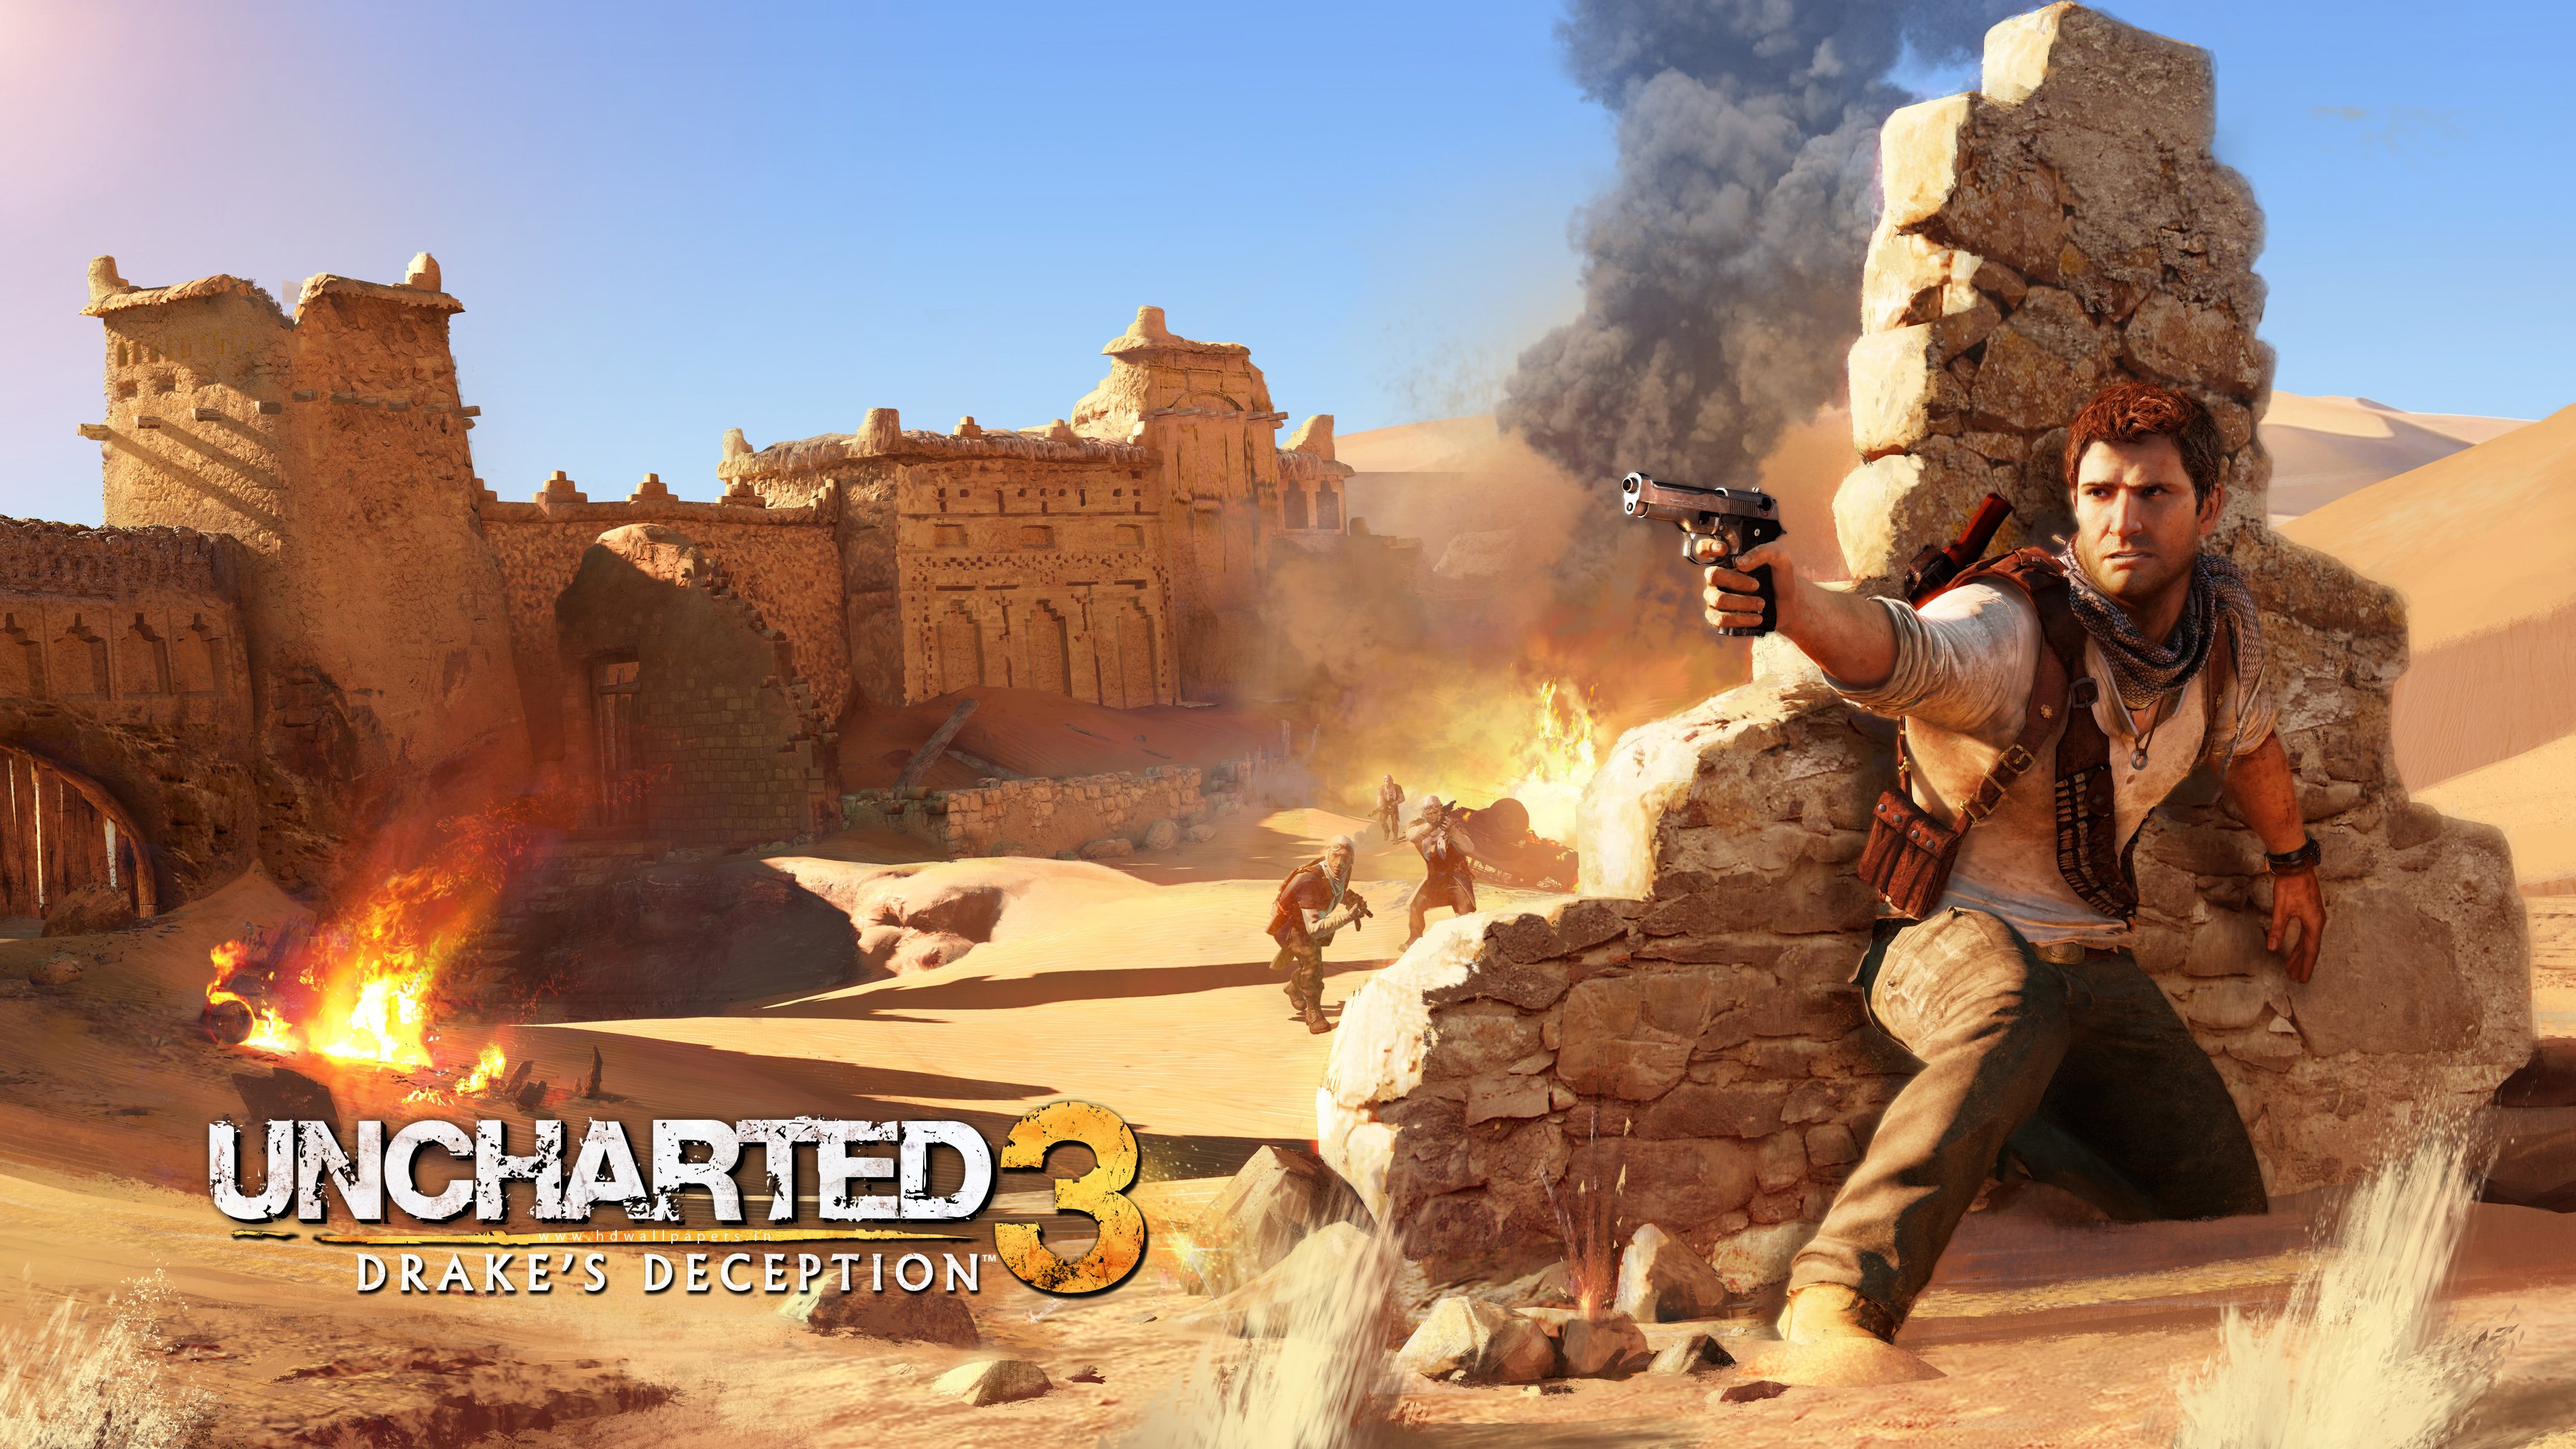 Drake in Uncharted 3 Wallpapers HD Wallpapers 3600x2025